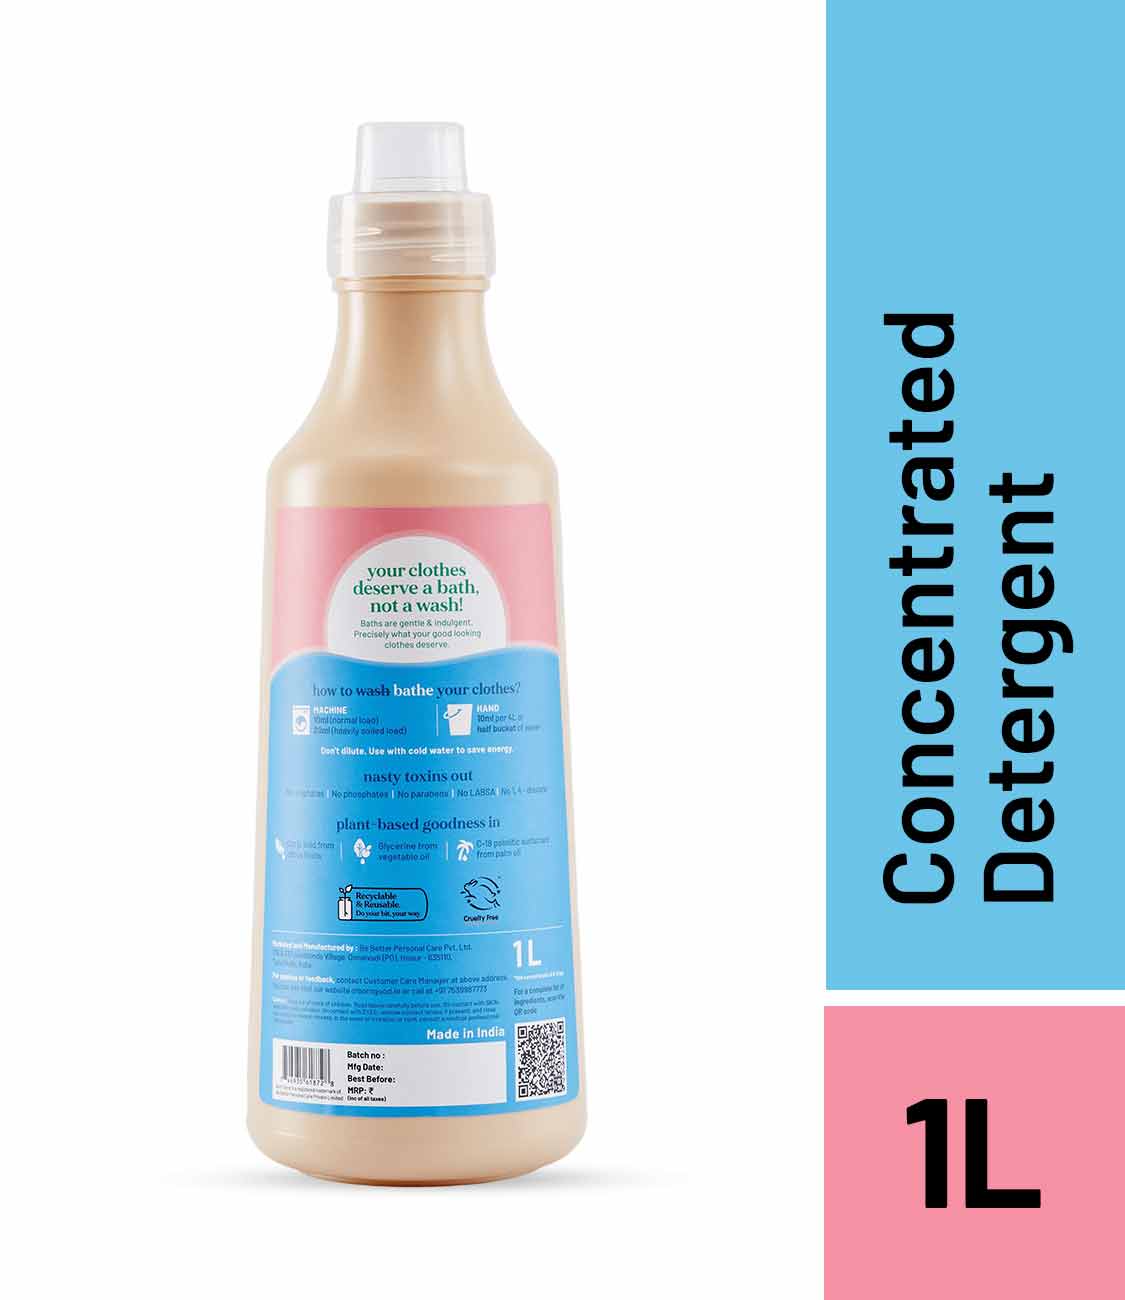 Born Good Plant-based Concentrated Laundry Detergent -  1 L Bottle